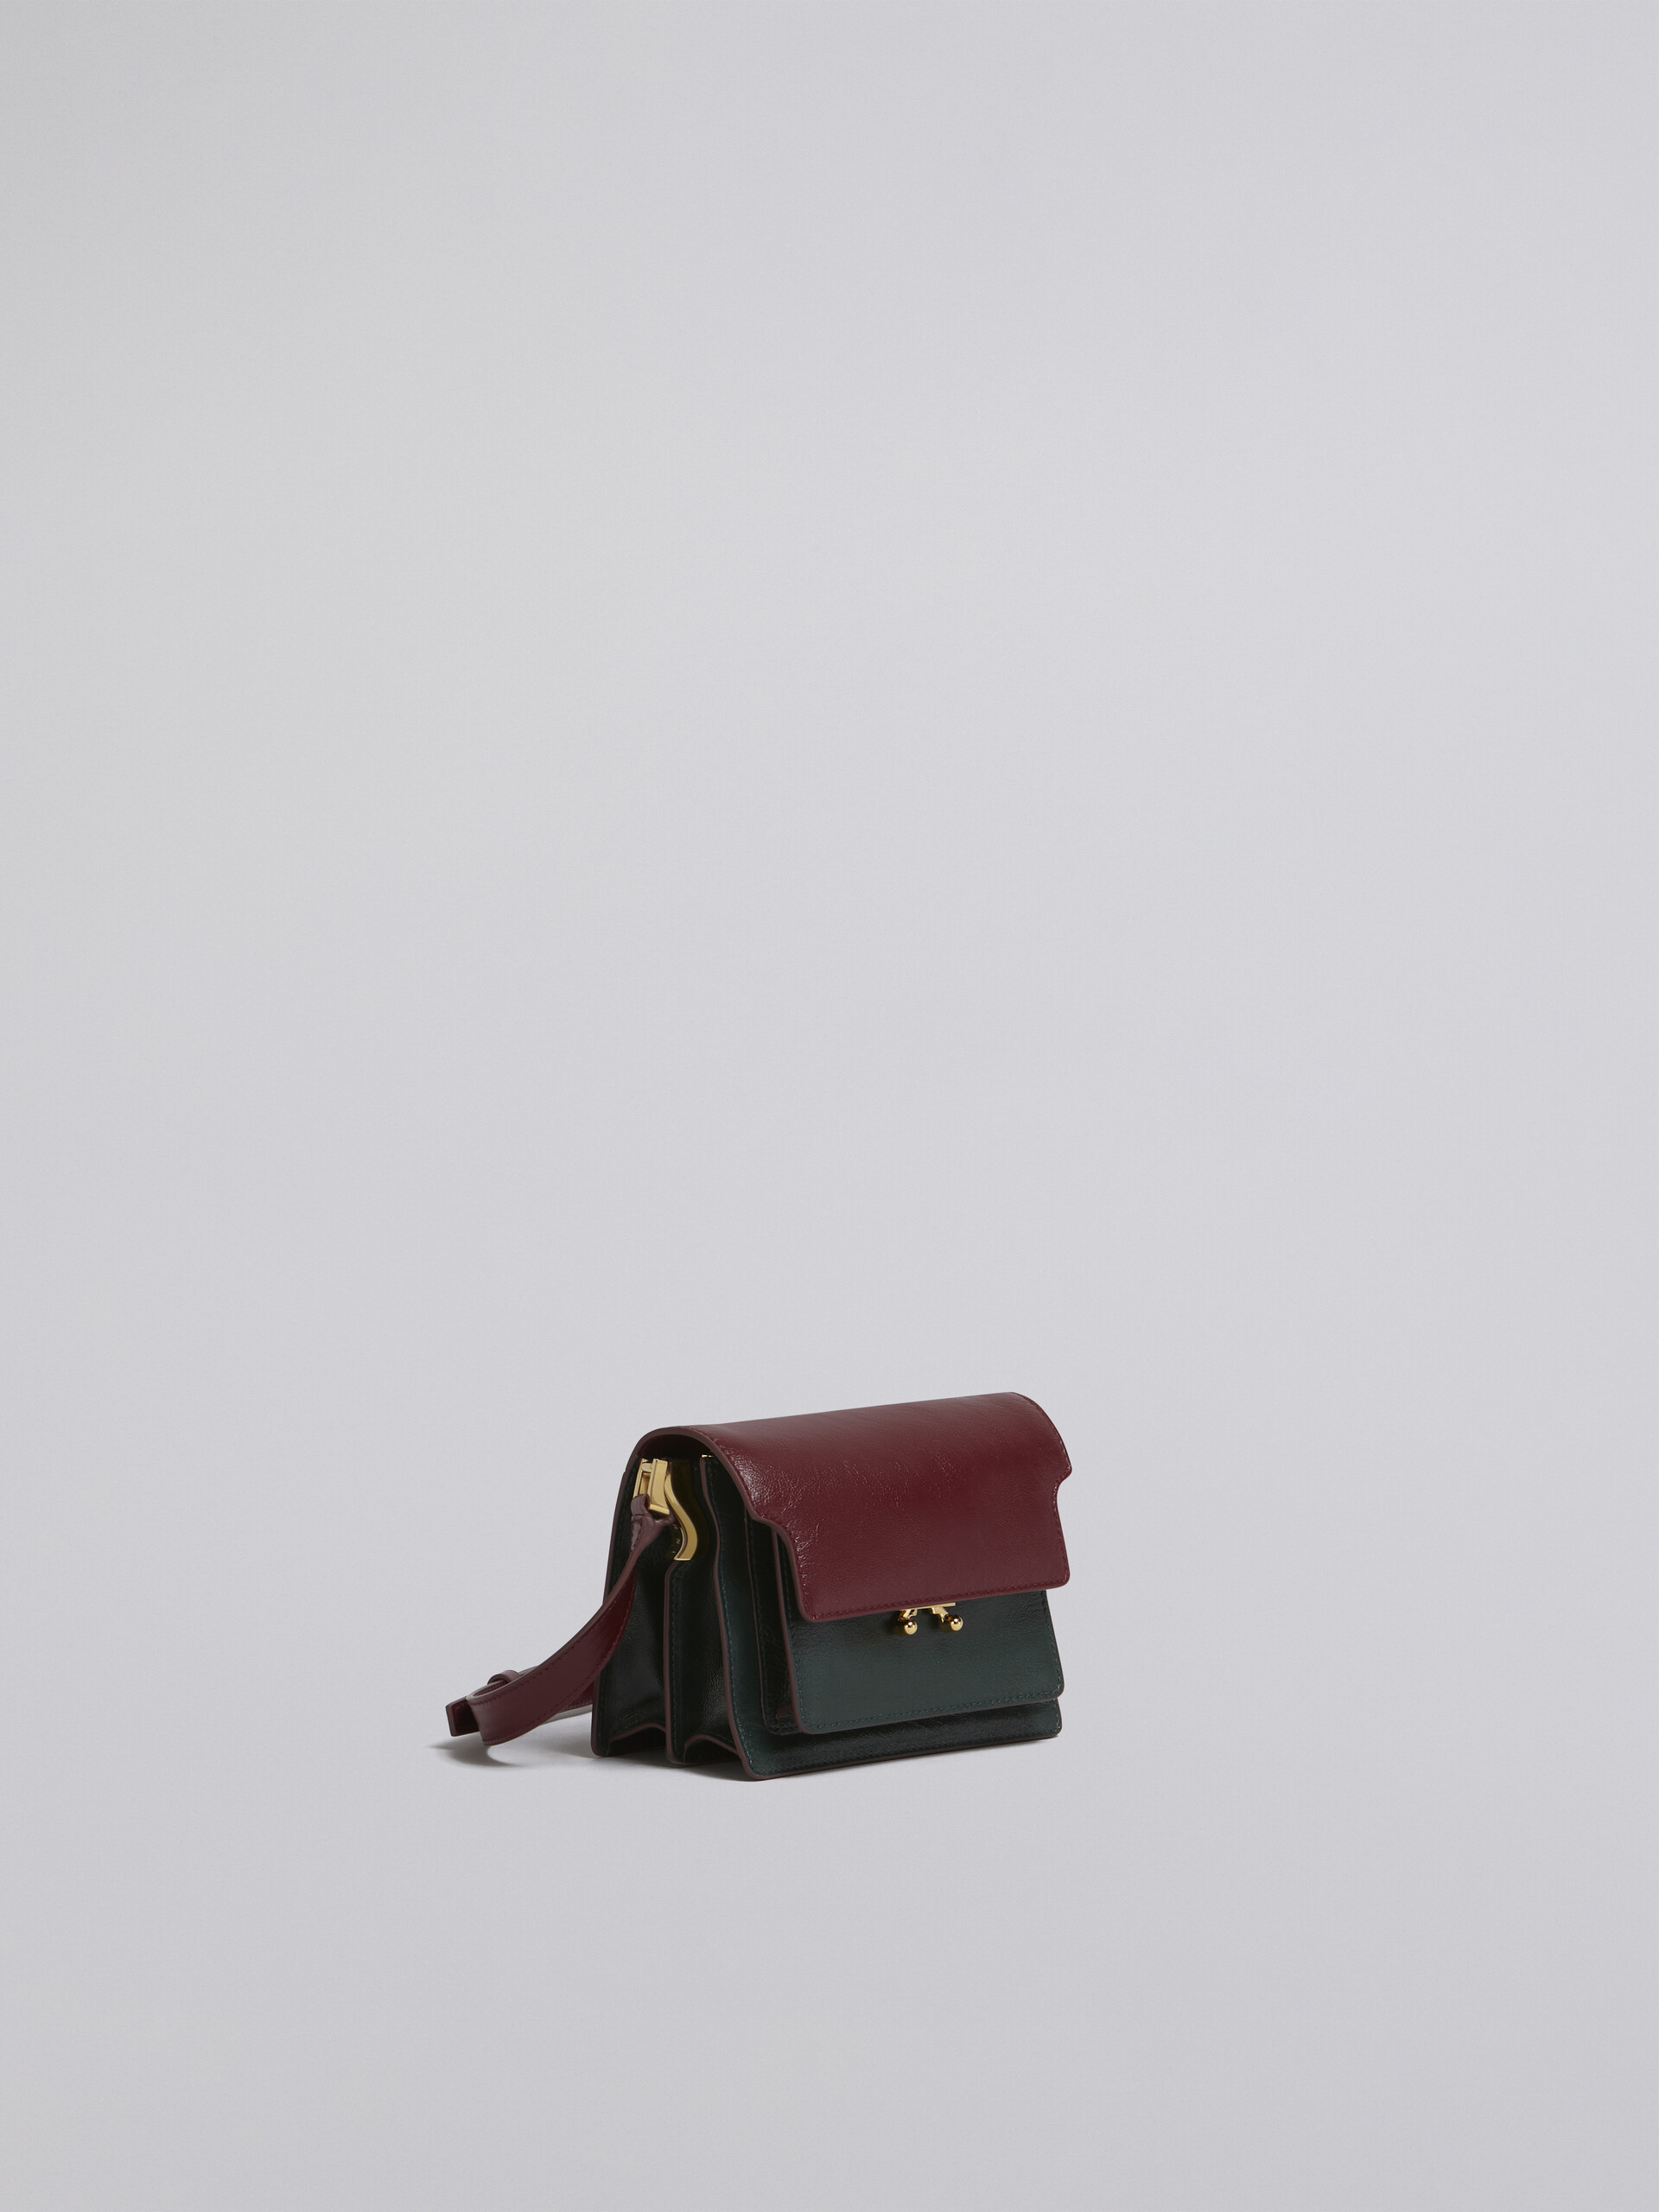 TRUNK SOFT bag in green and burgundy tumbled calf - Shoulder Bags - Image 5